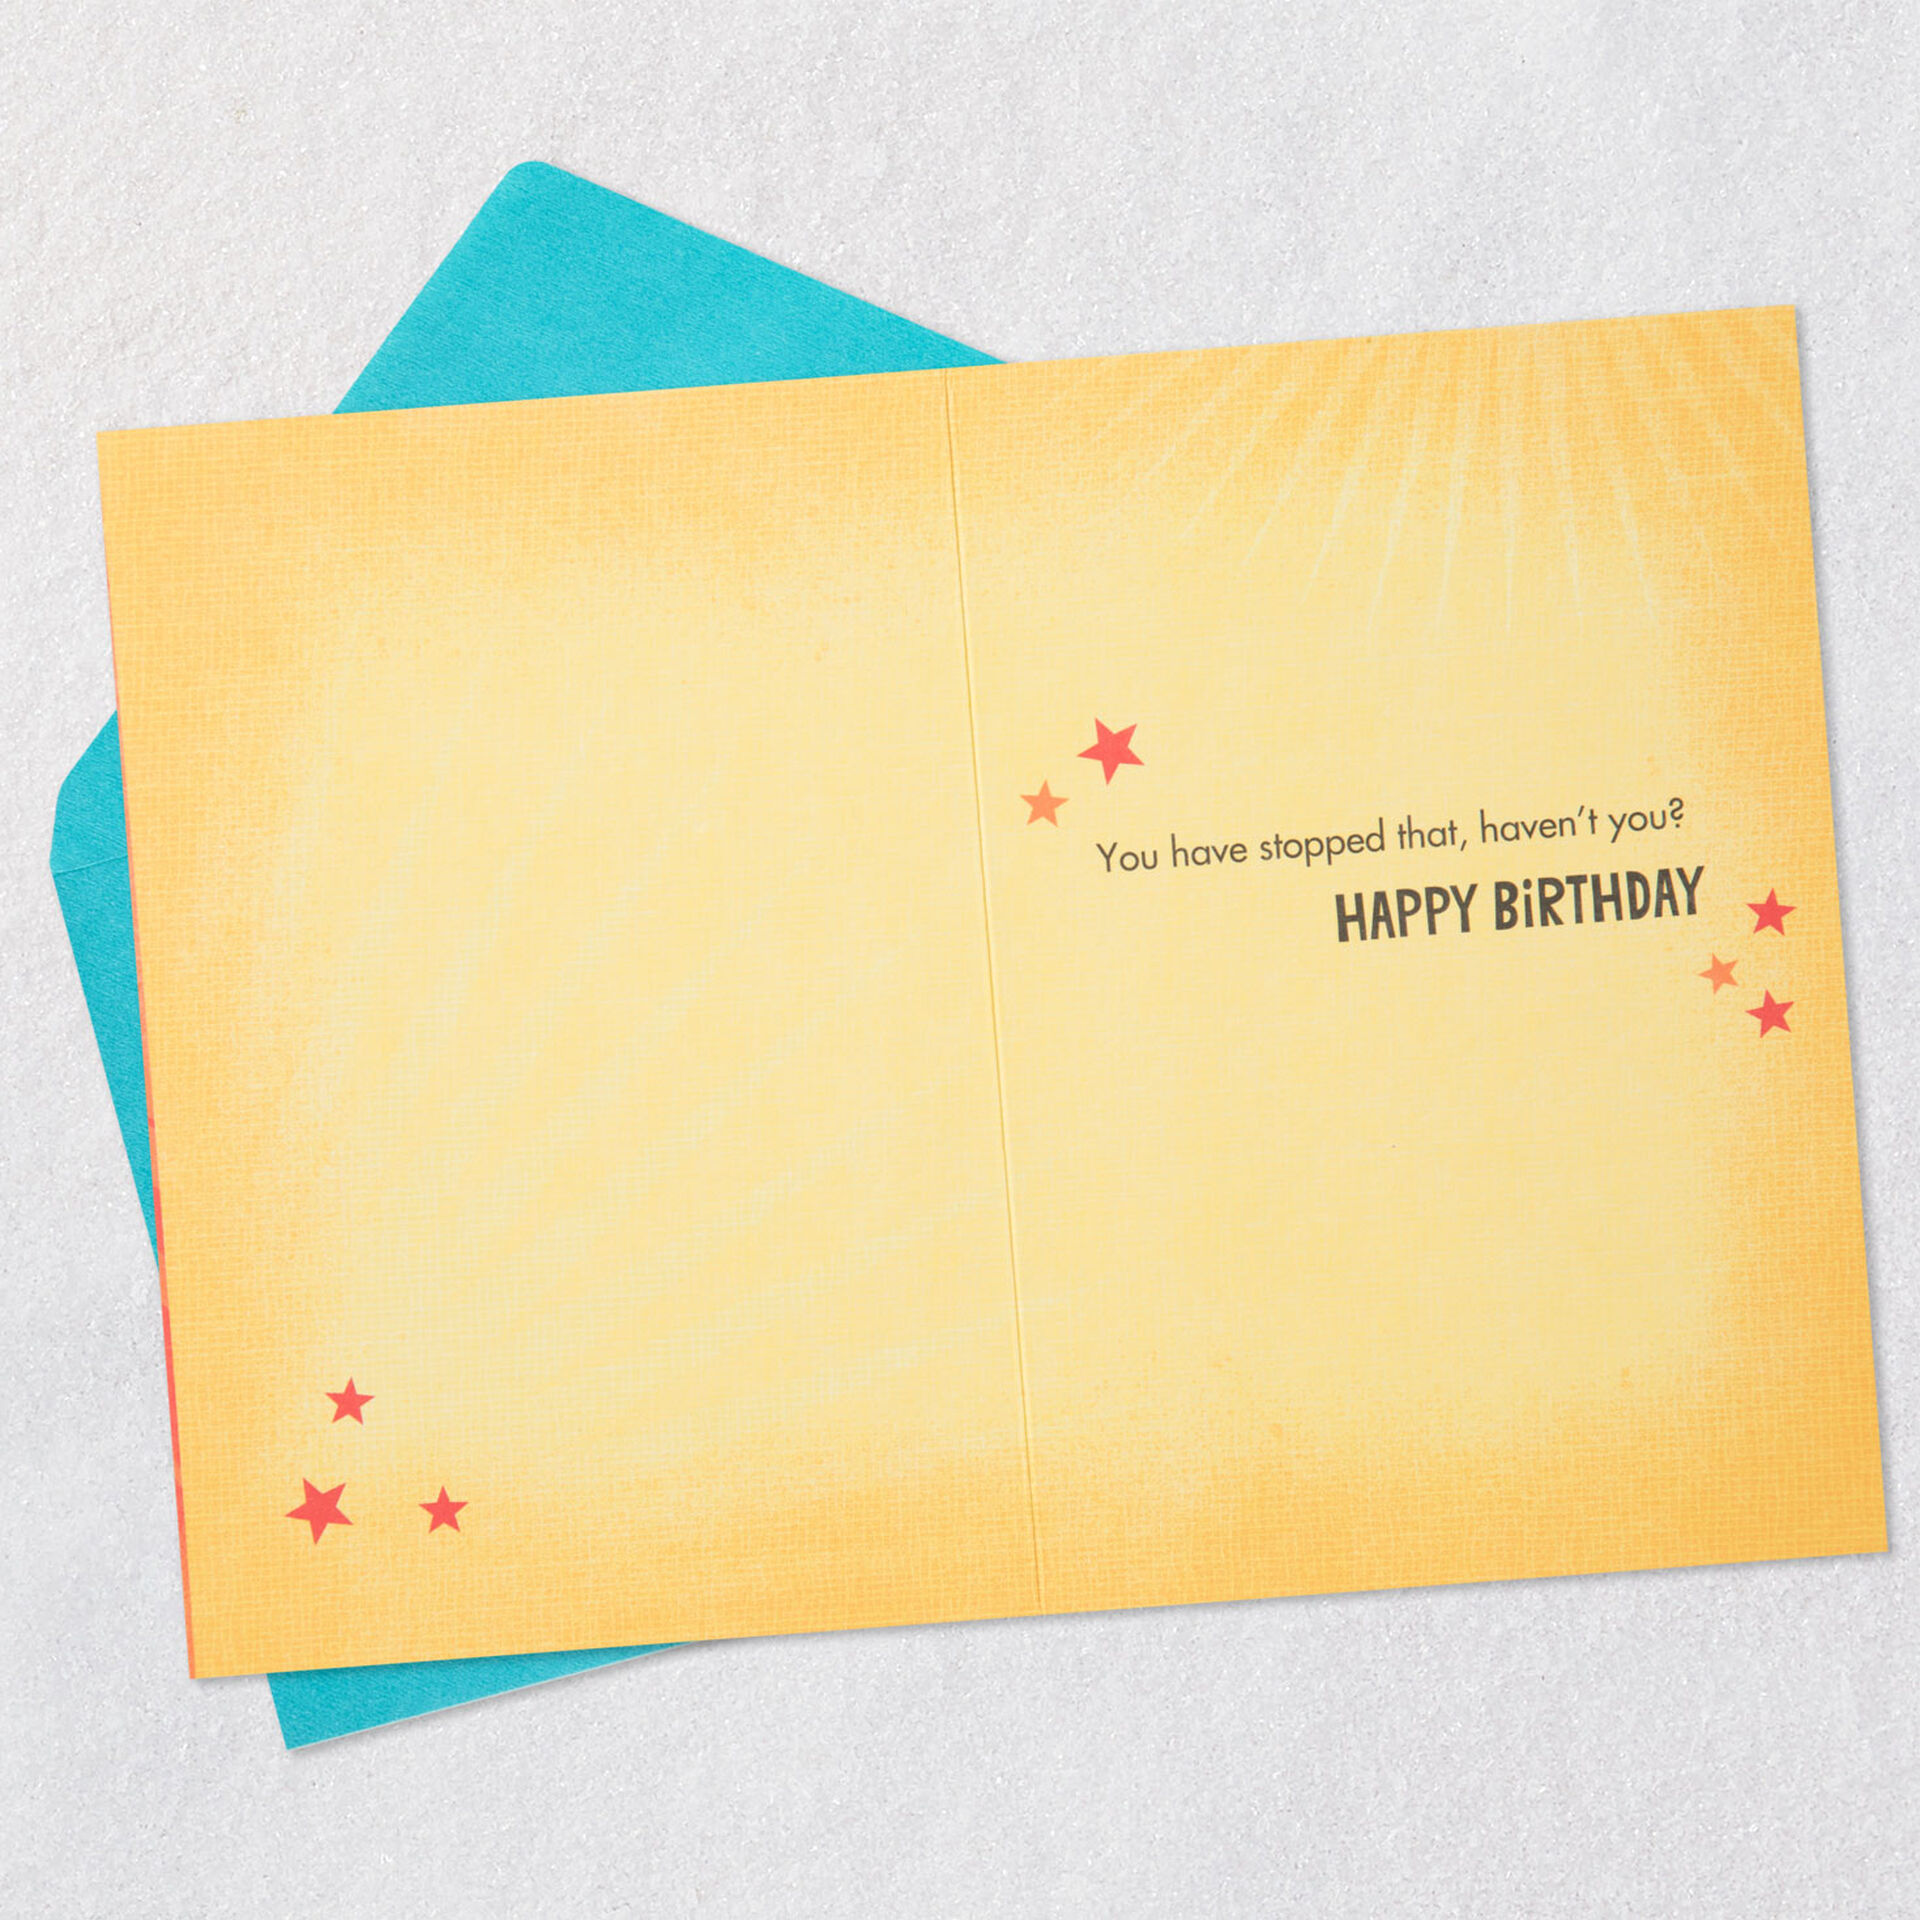 Boy-in-Underwear-and-Cape-Funny-Birthday-Card-for-Brother_299MAN3648_03